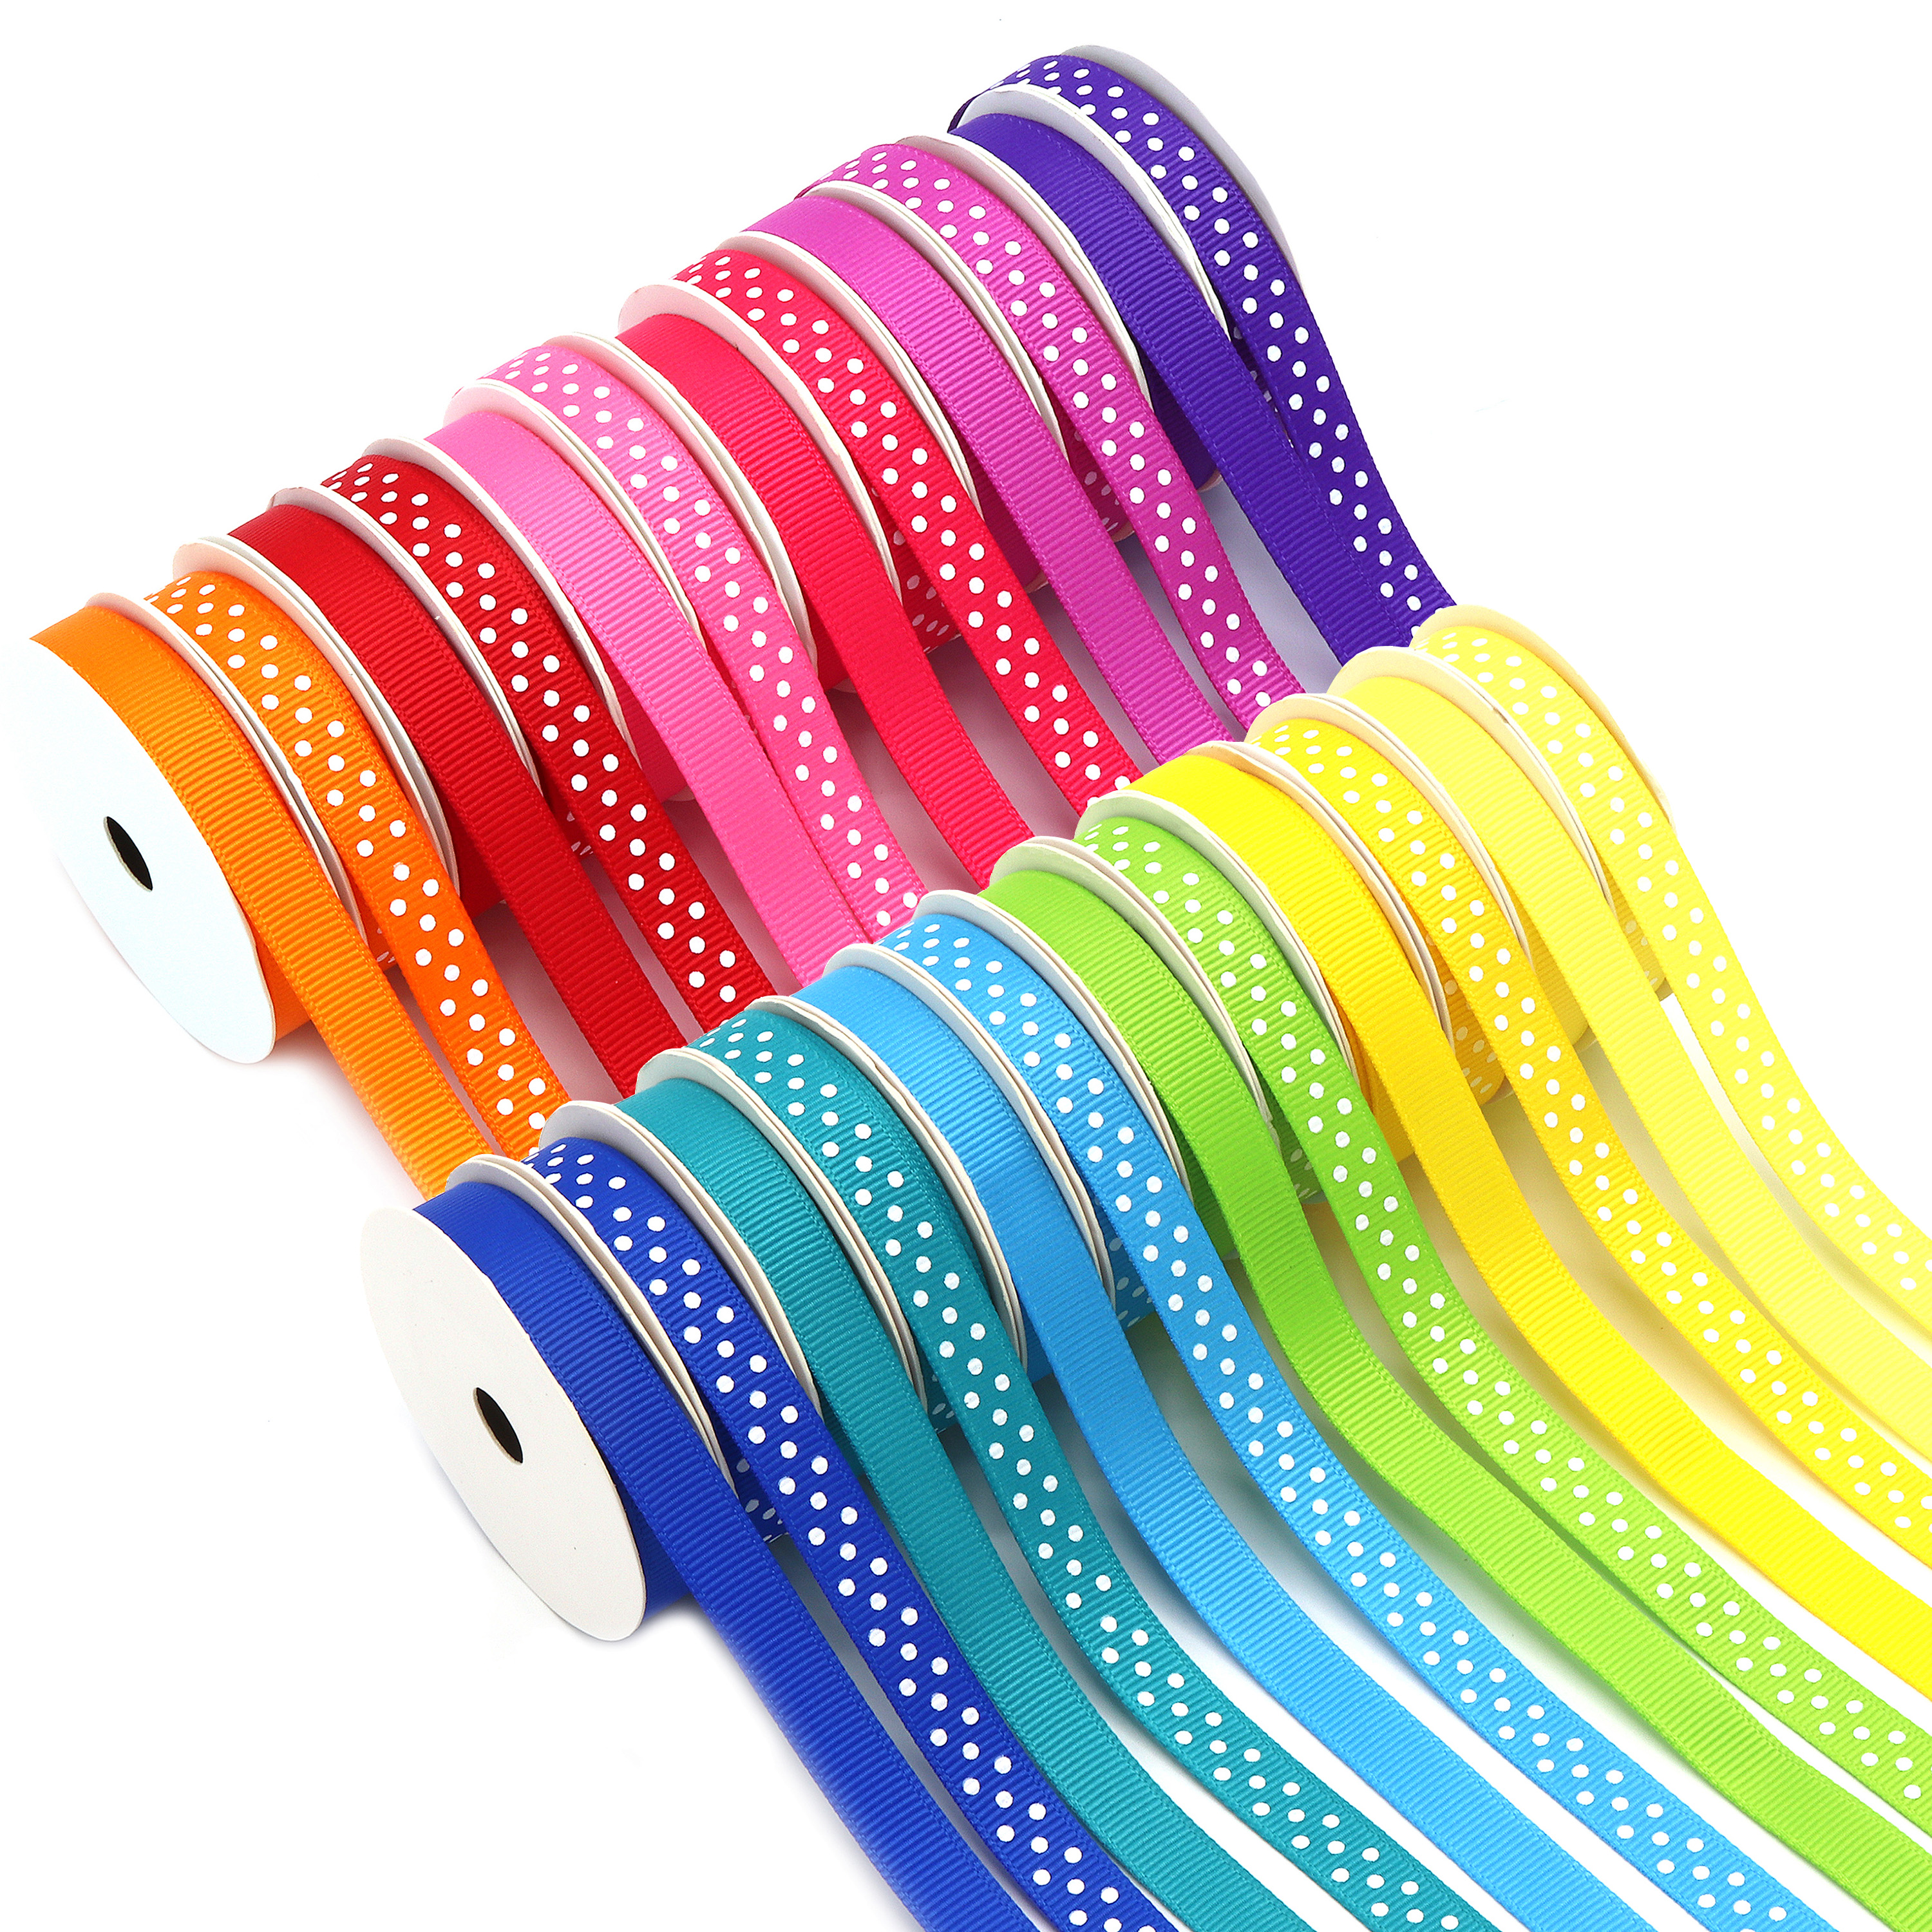 Solid and Polka Dot Grosgrain Ribbon Pack, 24 Bright Colors, 3/8" x 48 Yards by Gwen Studios - image 1 of 7